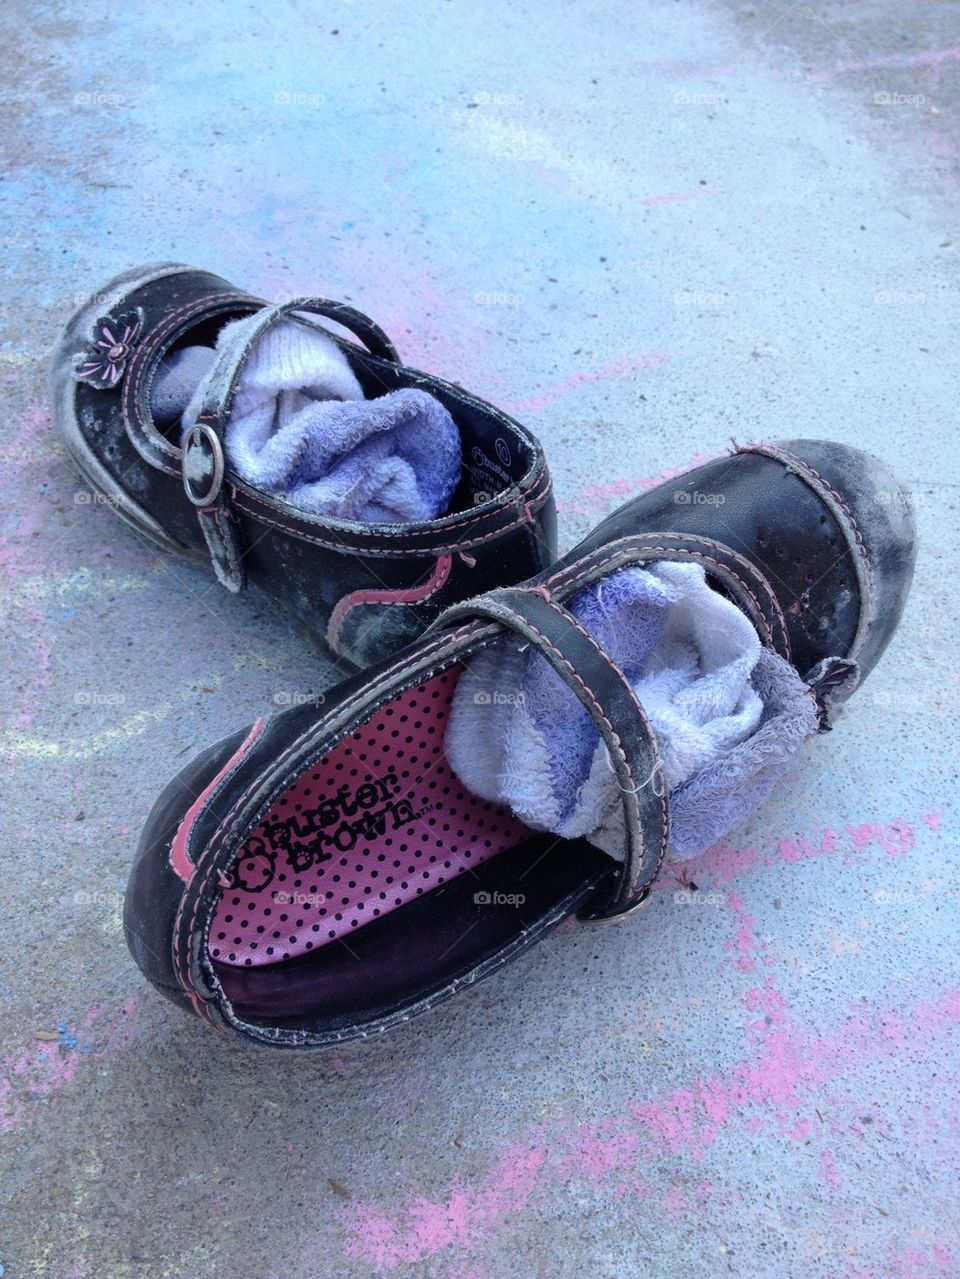 Shoes Left Behind For Play